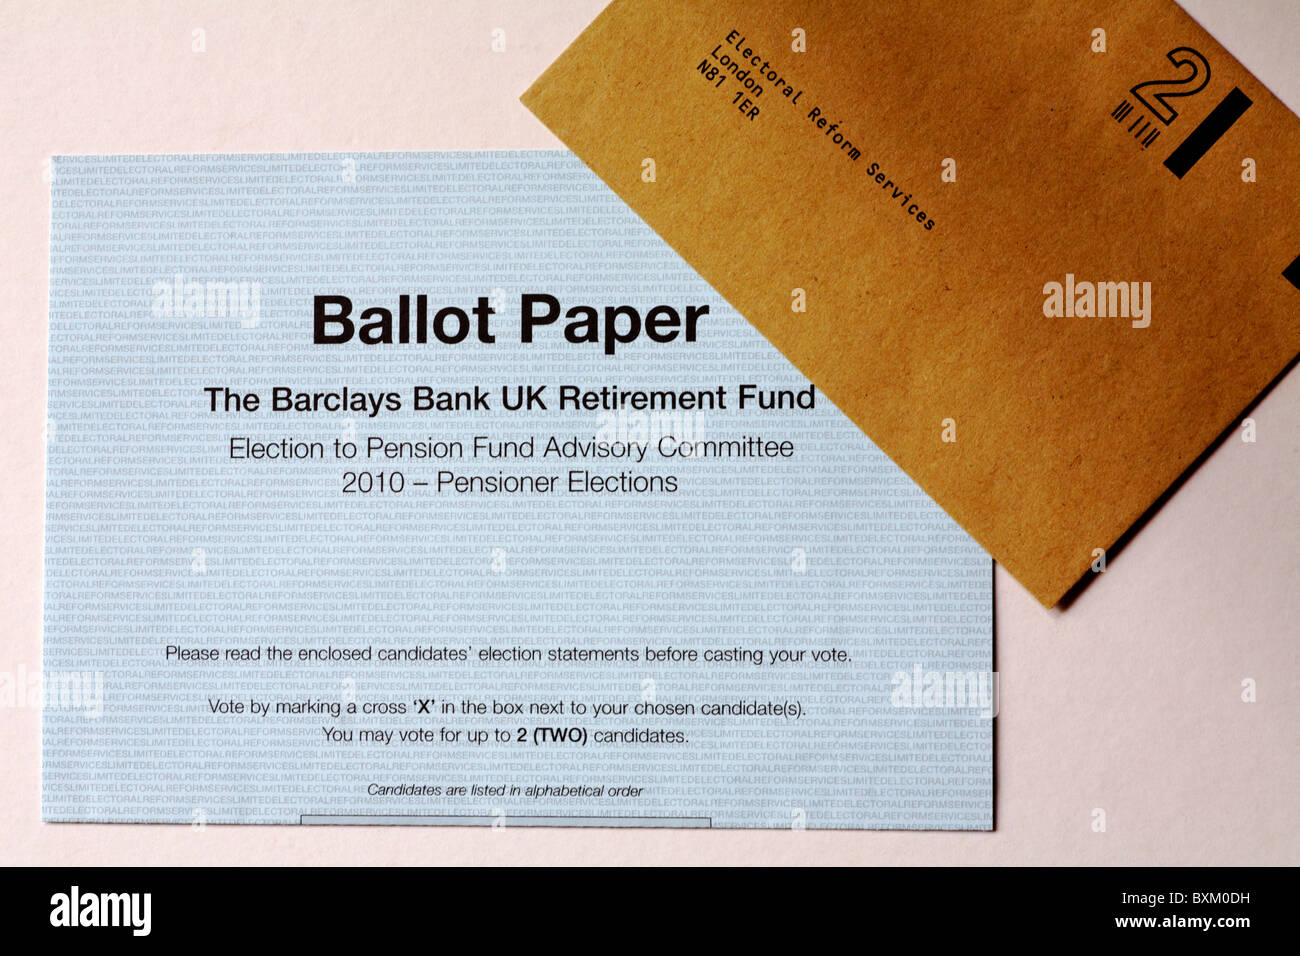 Ballot paper with returning envelope for the Barclays Bank UK Retirement Fund, election to pension Fund Advisory Committee 2010 - Pensioner Elections Stock Photo